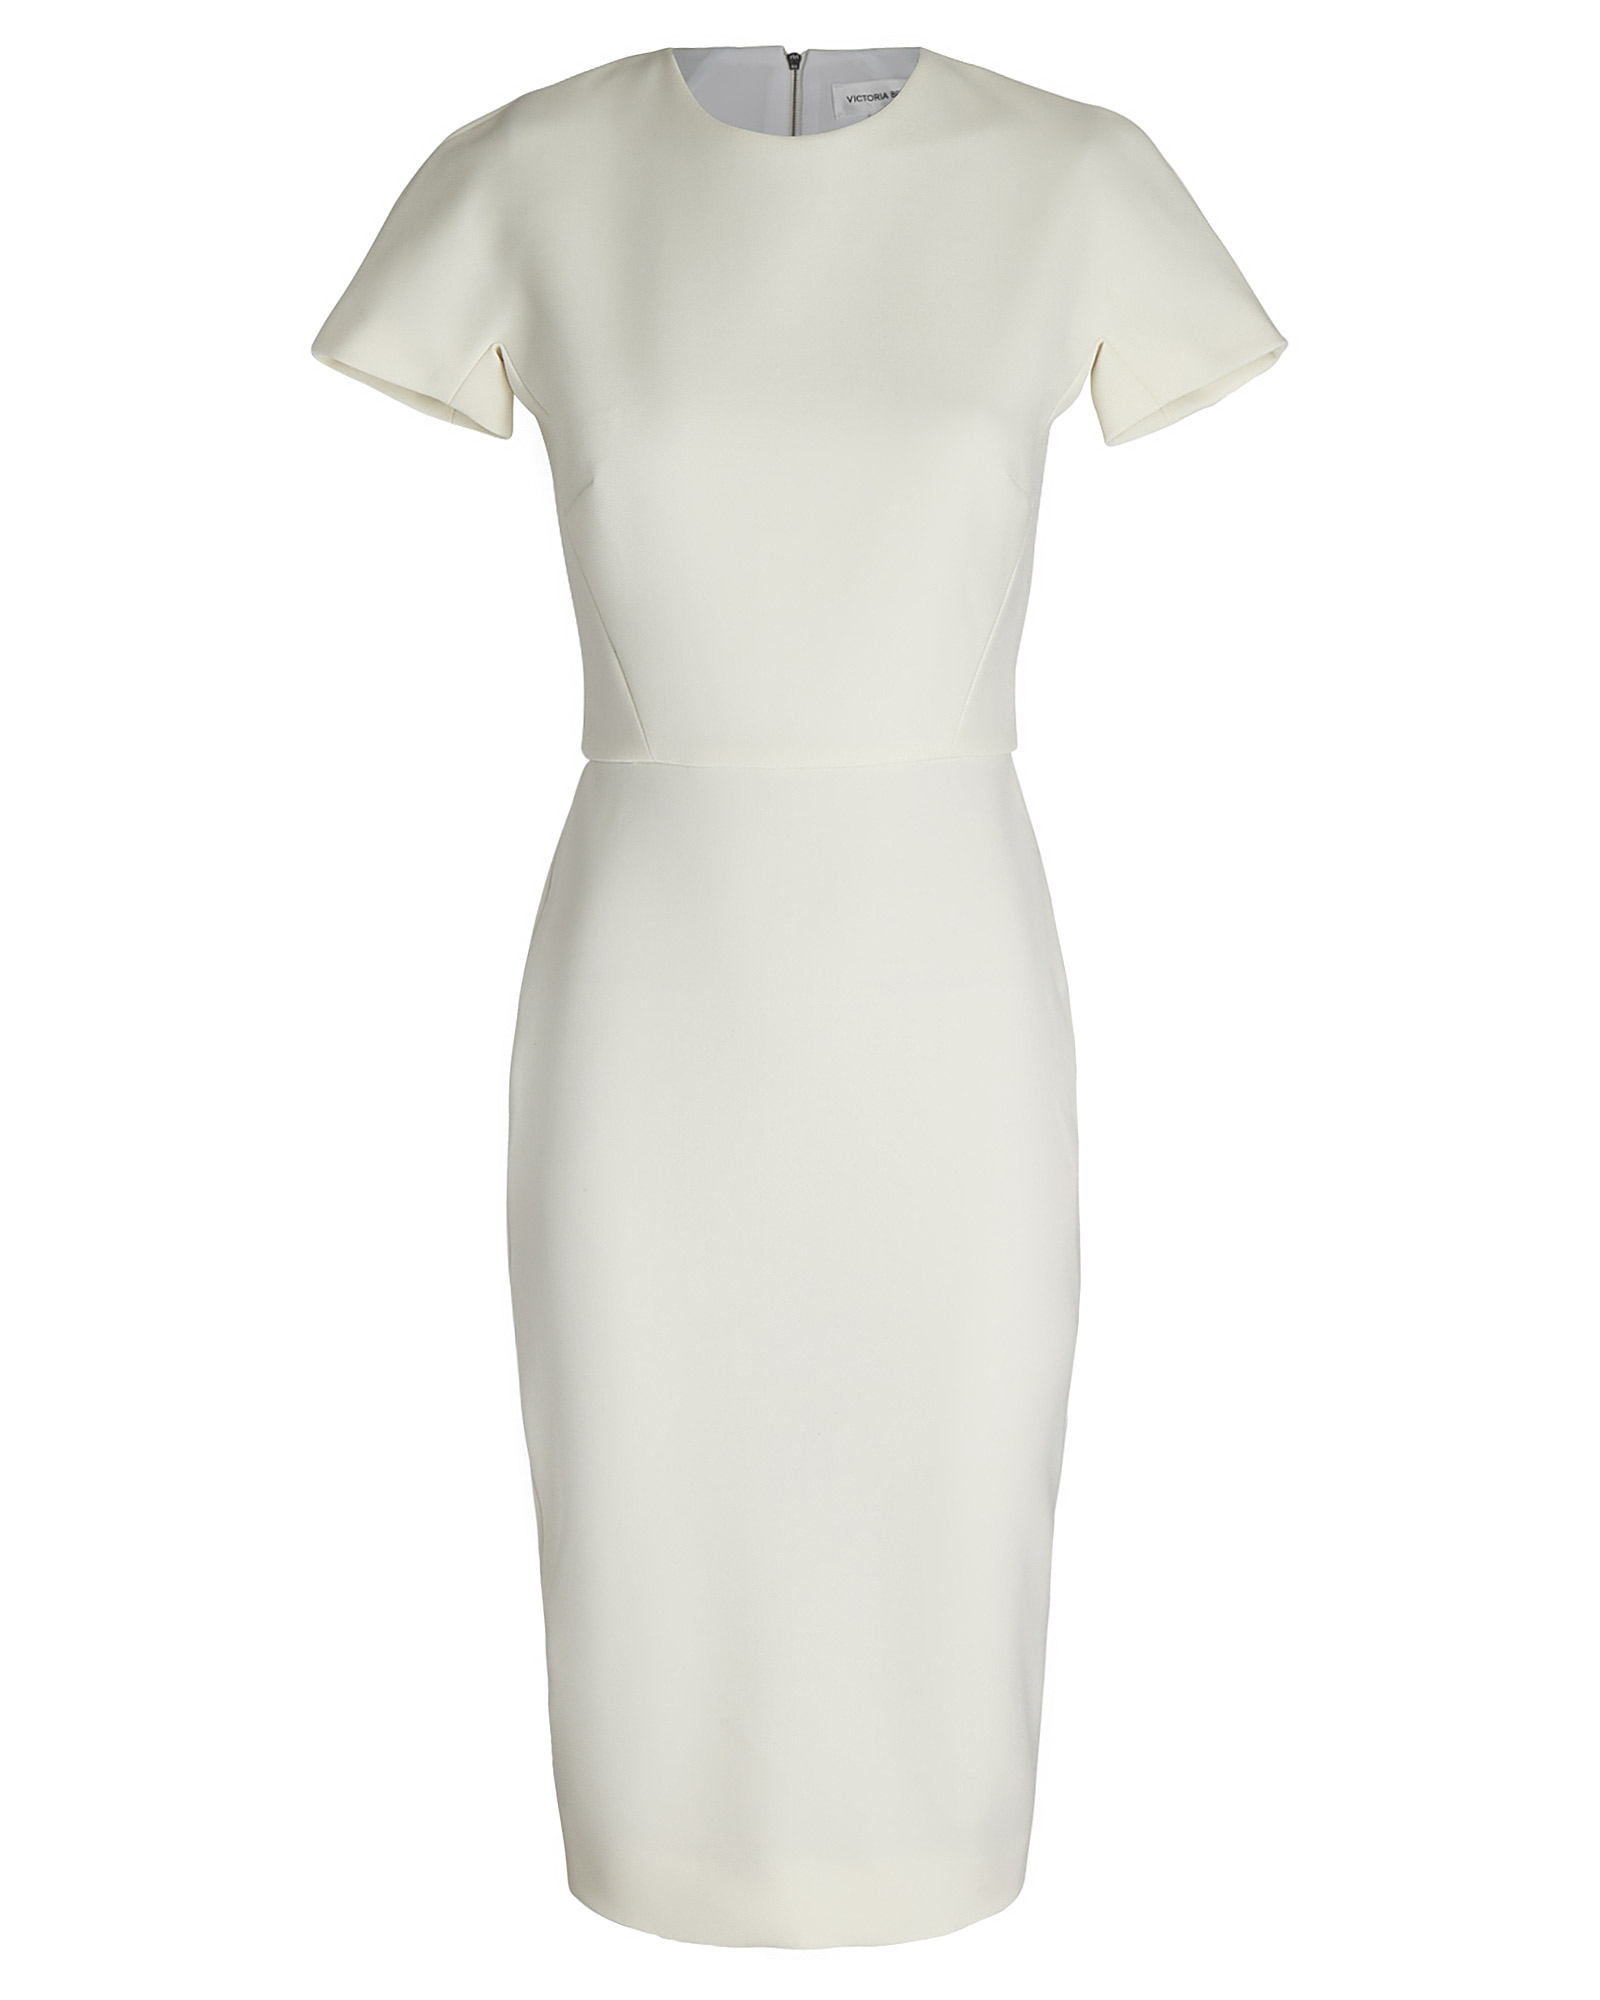 white sheath dress with sleeves